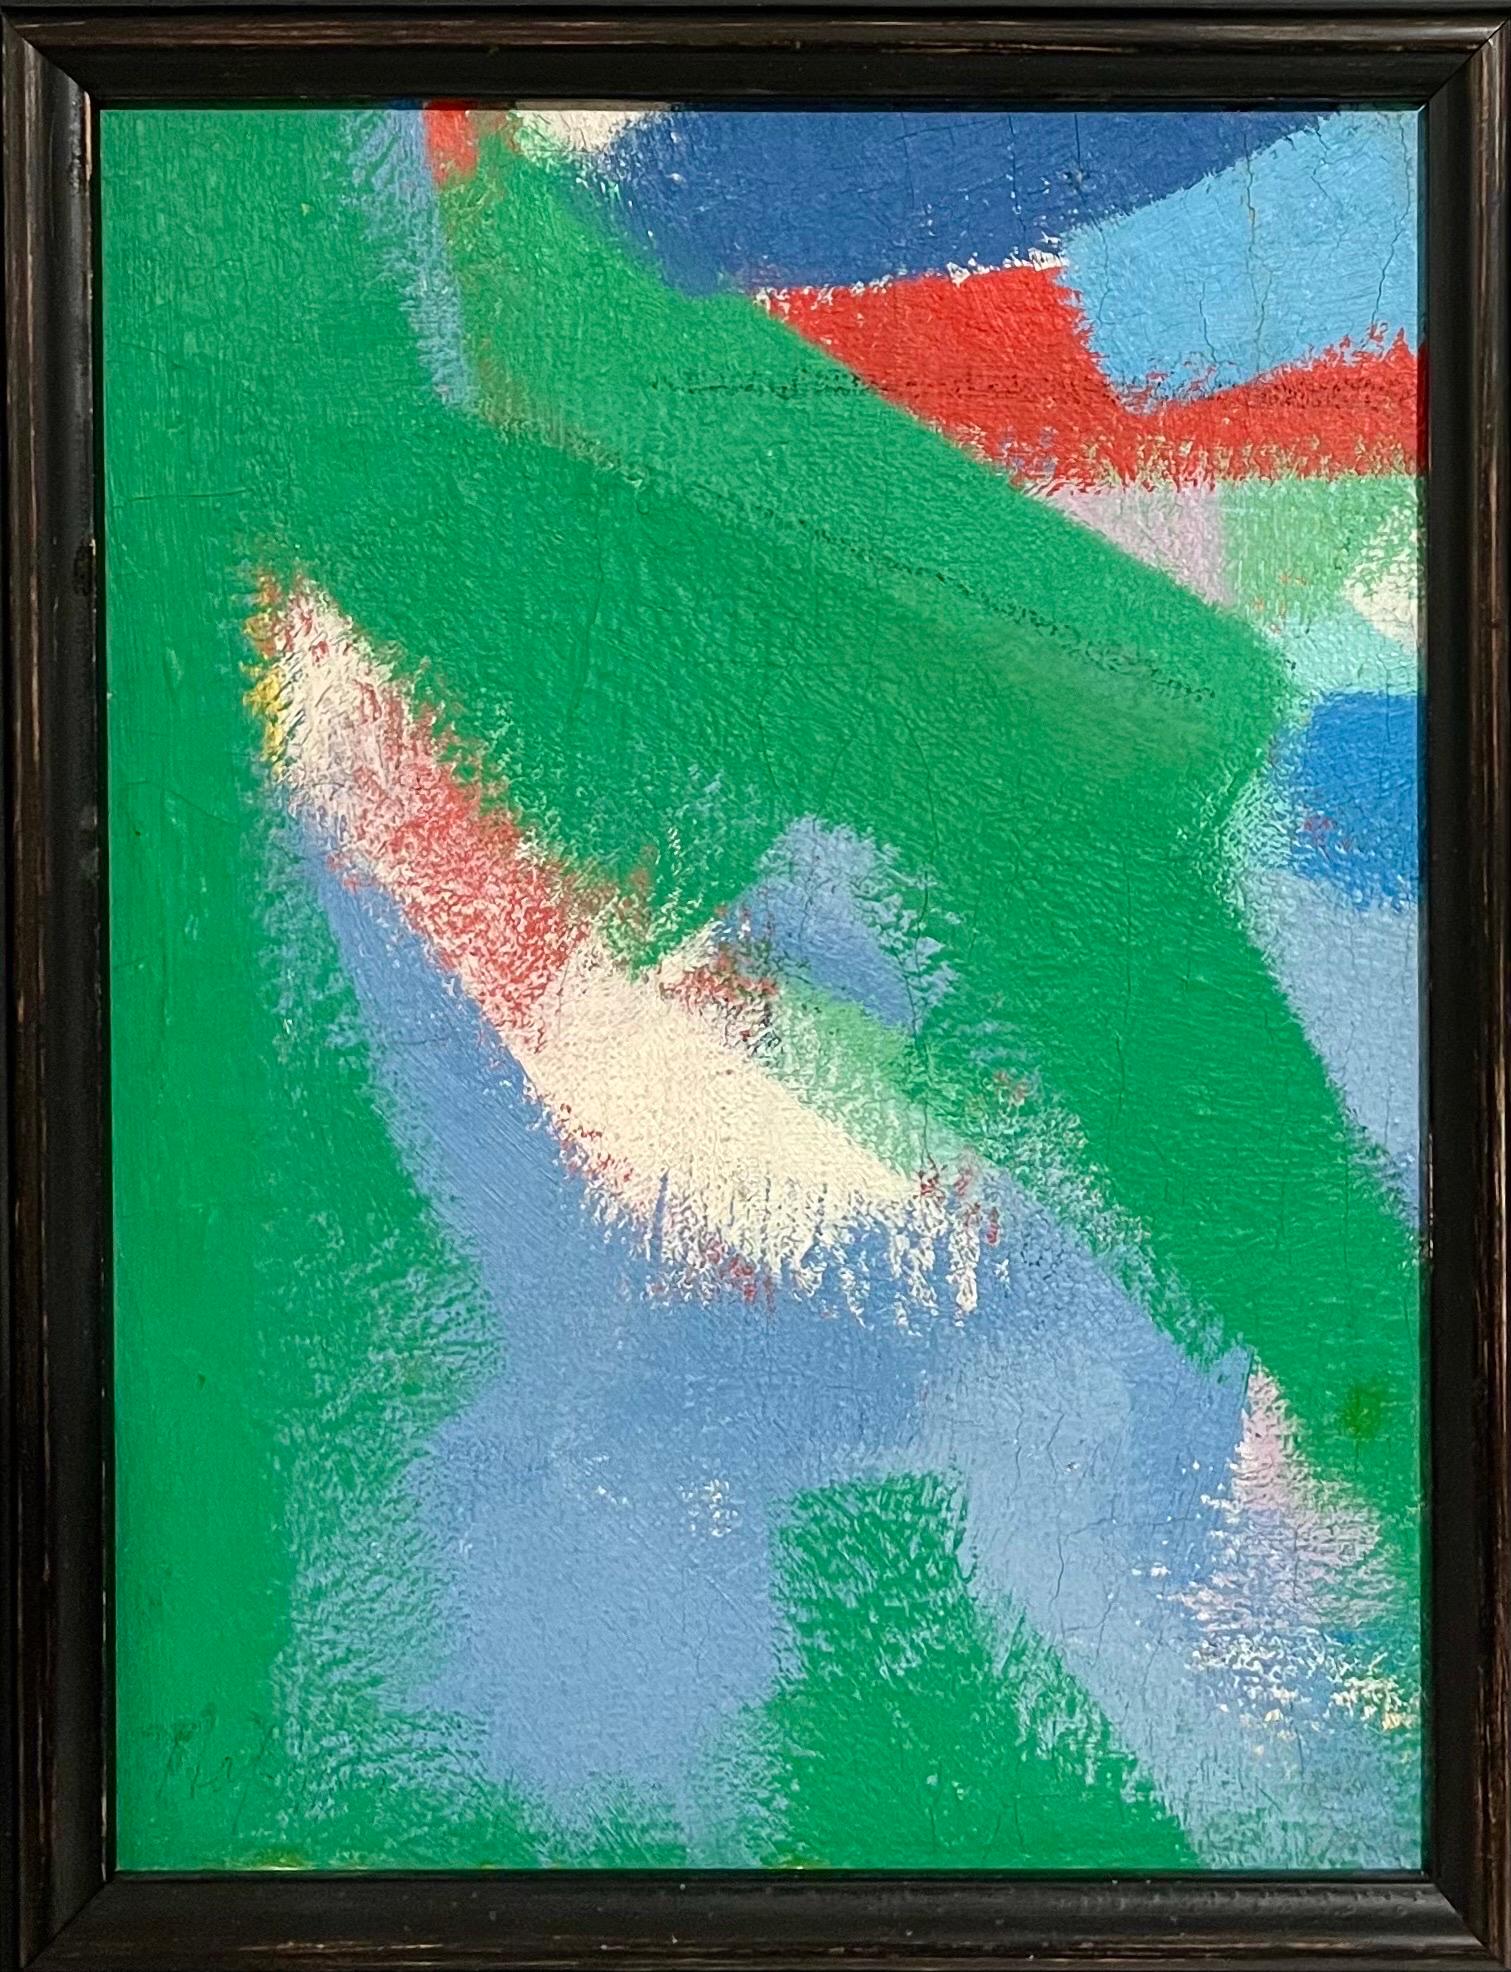 Carl Robert Holty (American 1900-1973)  
Abstract Expressionism Oil on Masonite board.  
Abstract with greens blues and red, 
Dimensions 12 x 9-1/2 inches. Framed 17 X 14 inches
Hand signed faintly in ink lower left Holty. 
Provenance: Richard